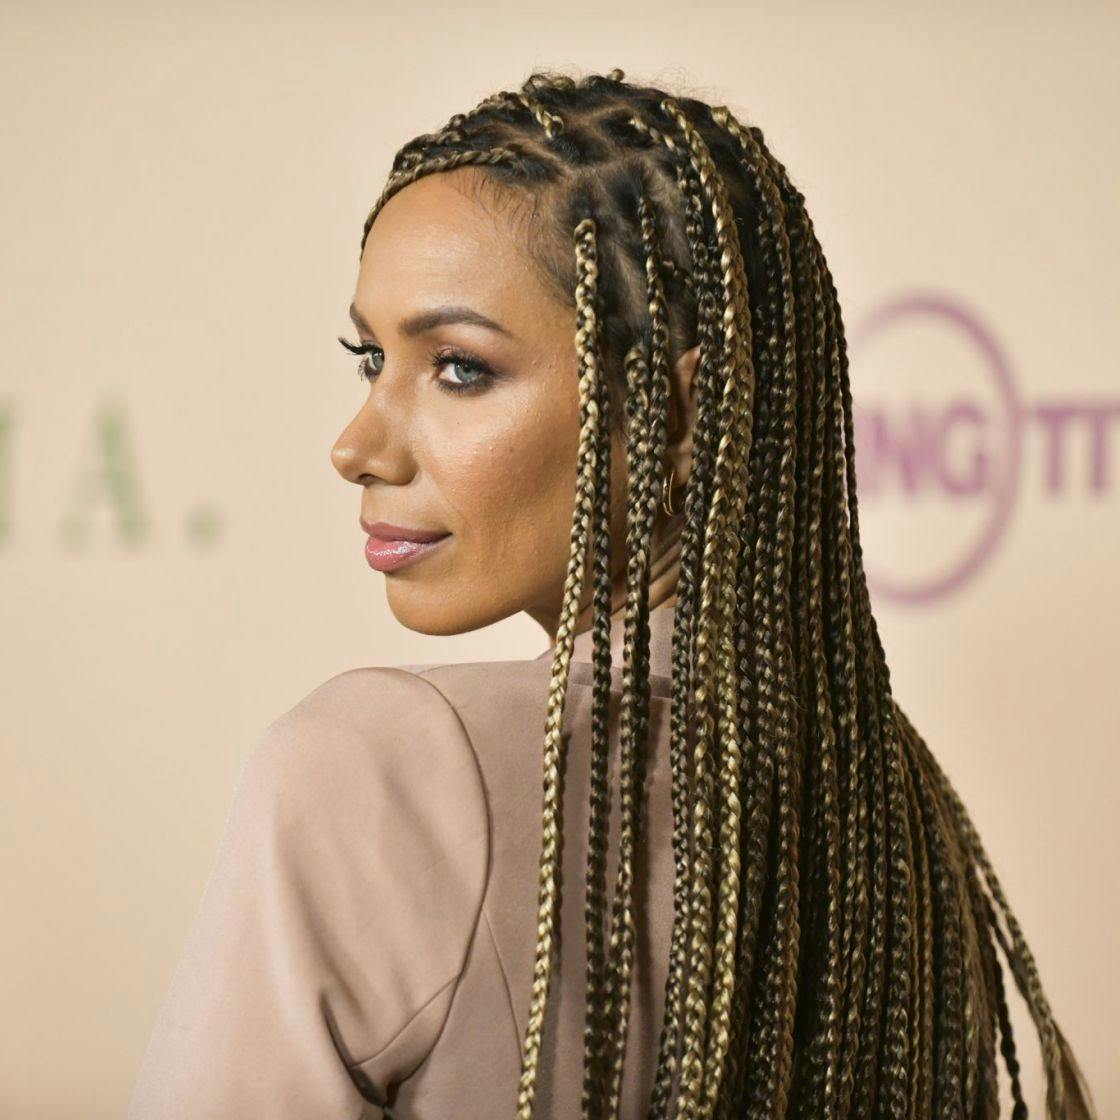 Leona Lewis films Instagram video about racist London store owner